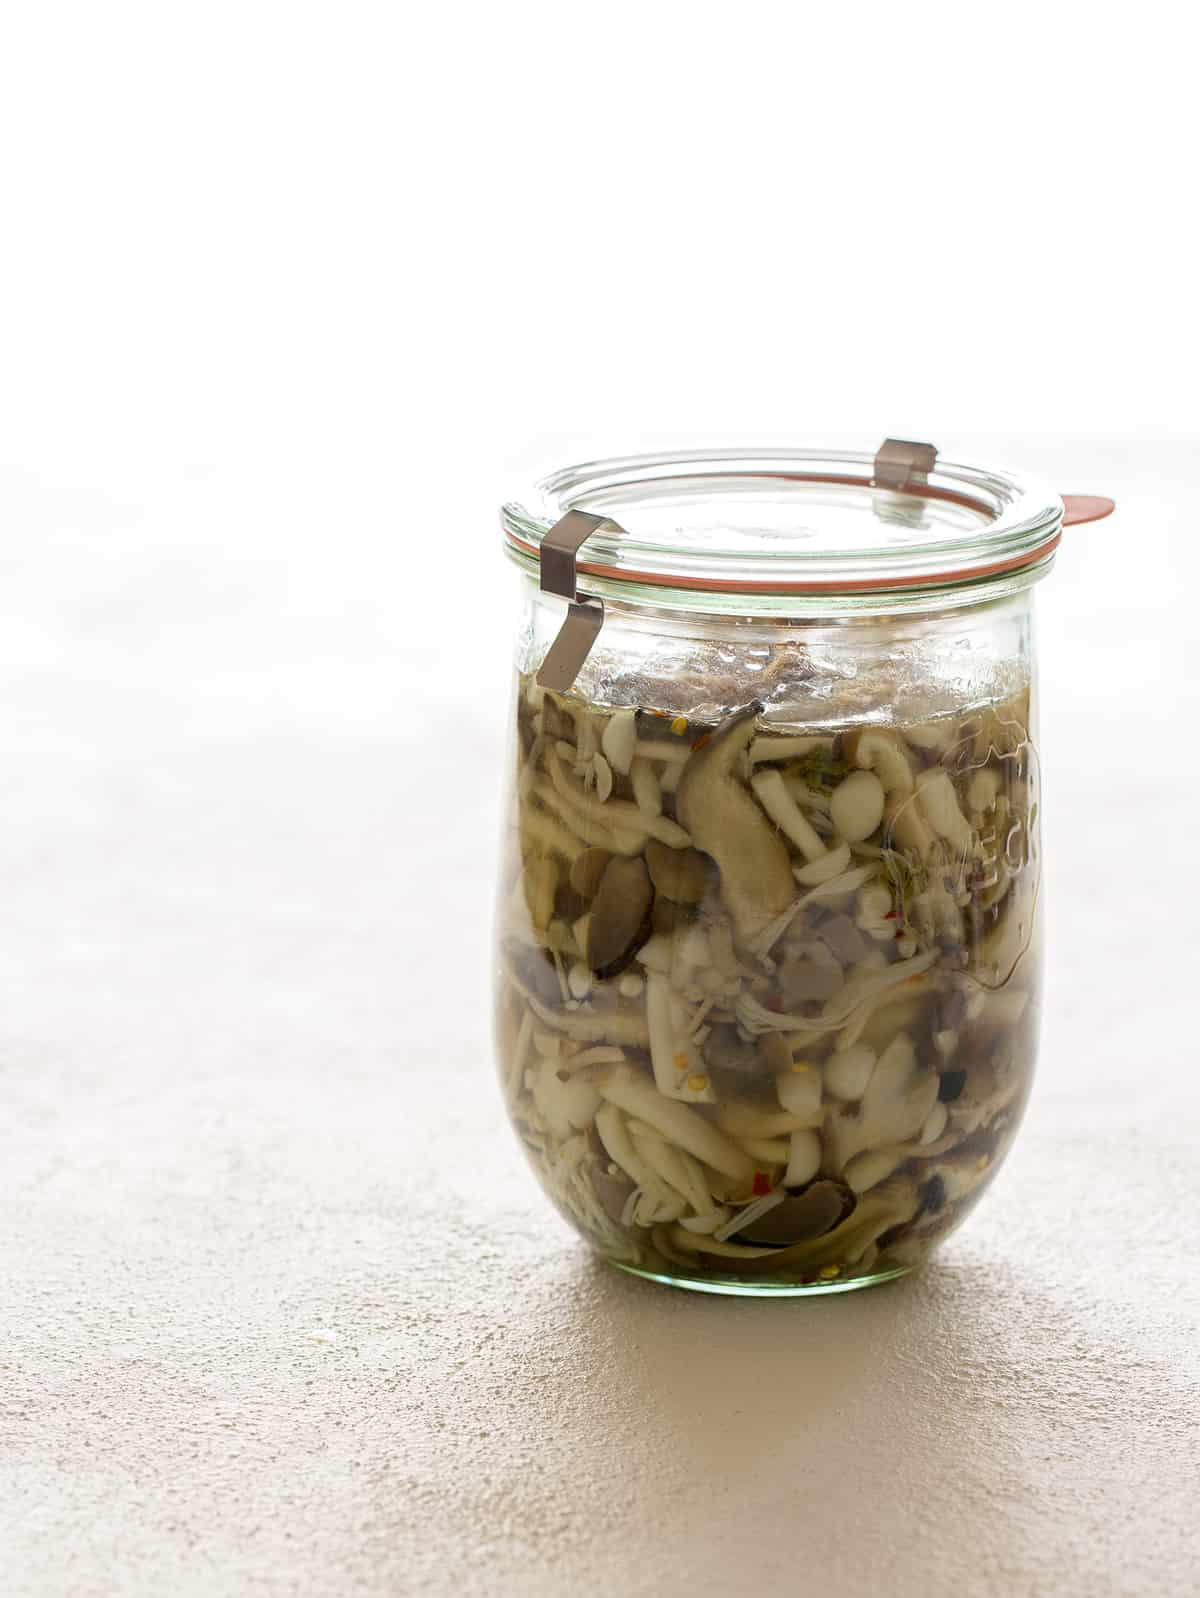 Canning Mushrooms - How to Make Your Own Canned Mushrooms